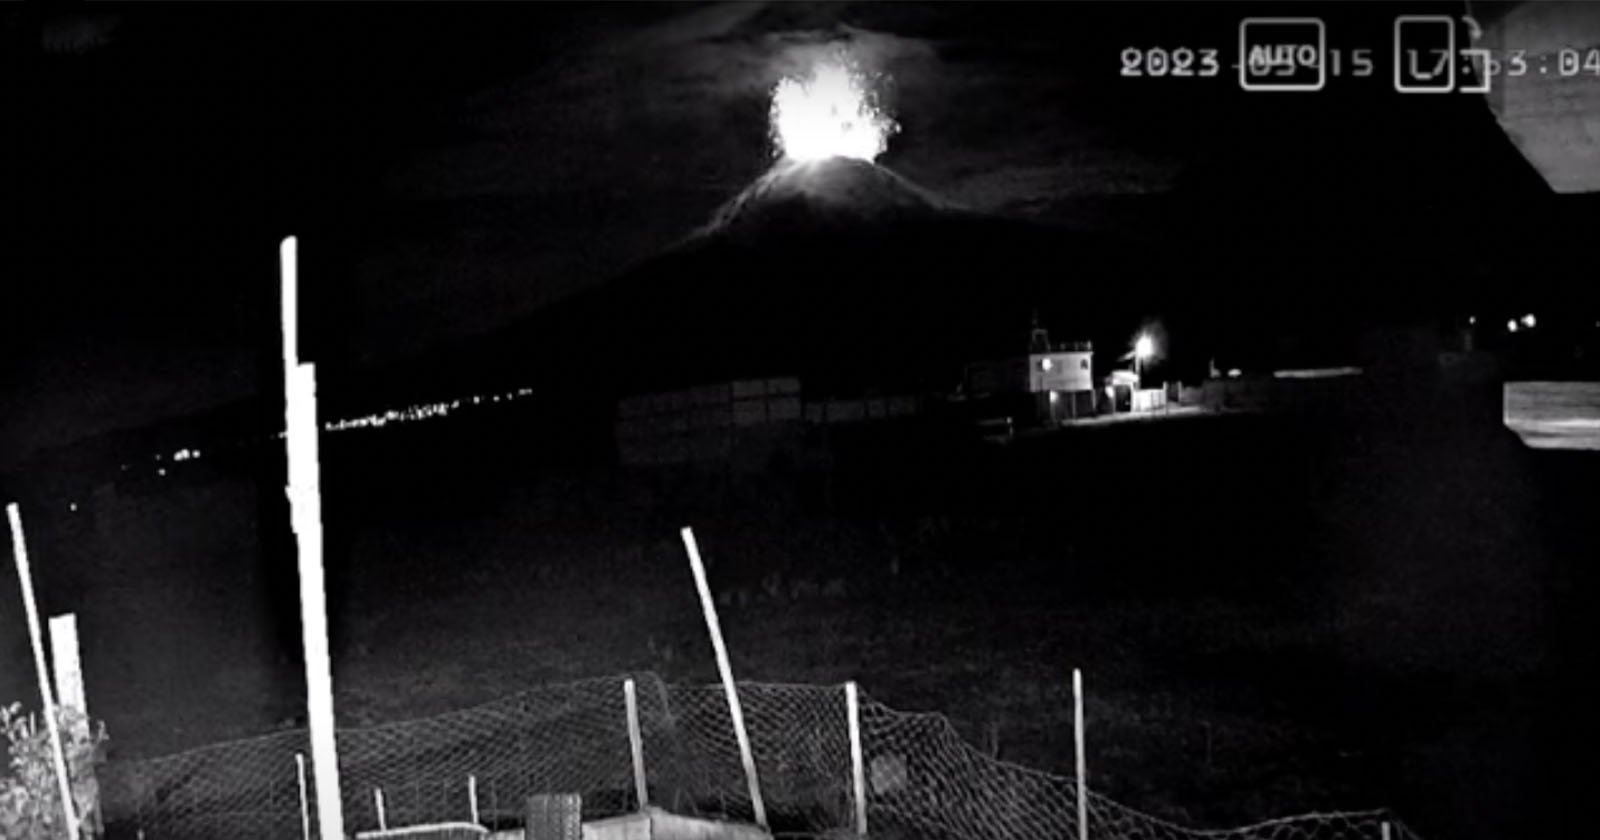 Huge Volcano Eruption Caught on Home Security Camera